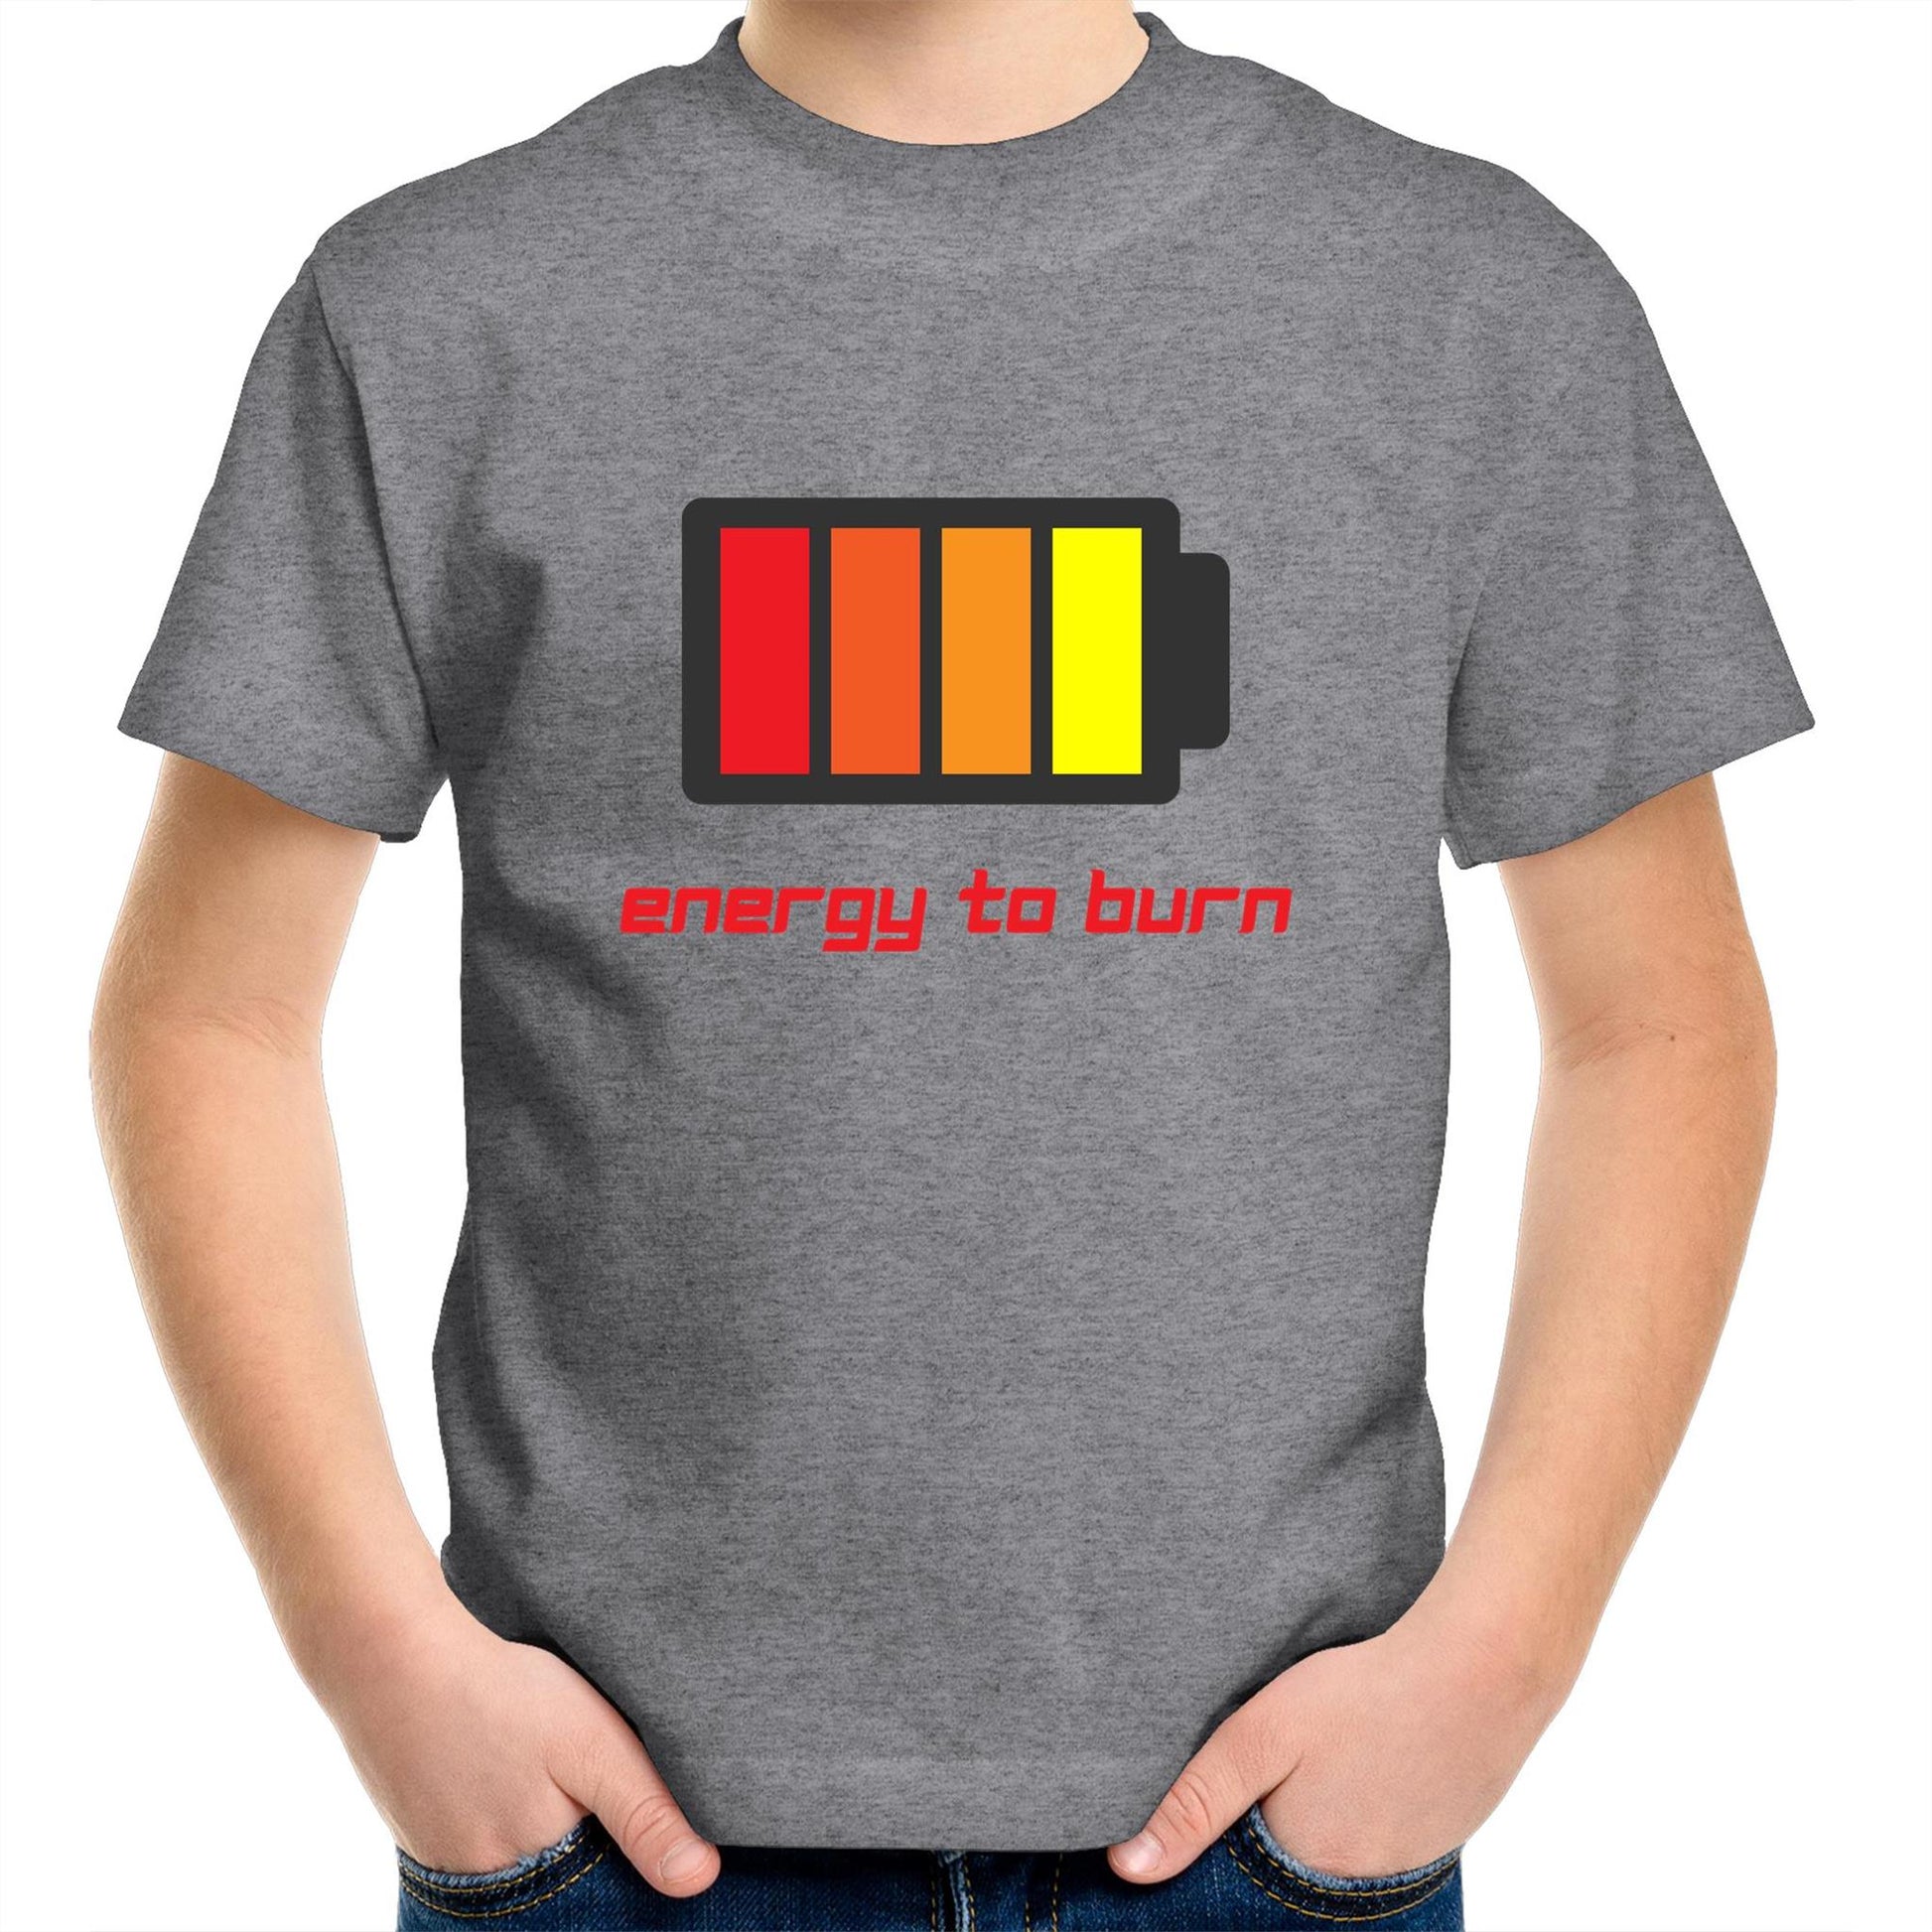 Energy To Burn - Kids Youth Crew T-Shirt Grey Marle Kids Youth T-shirt Funny